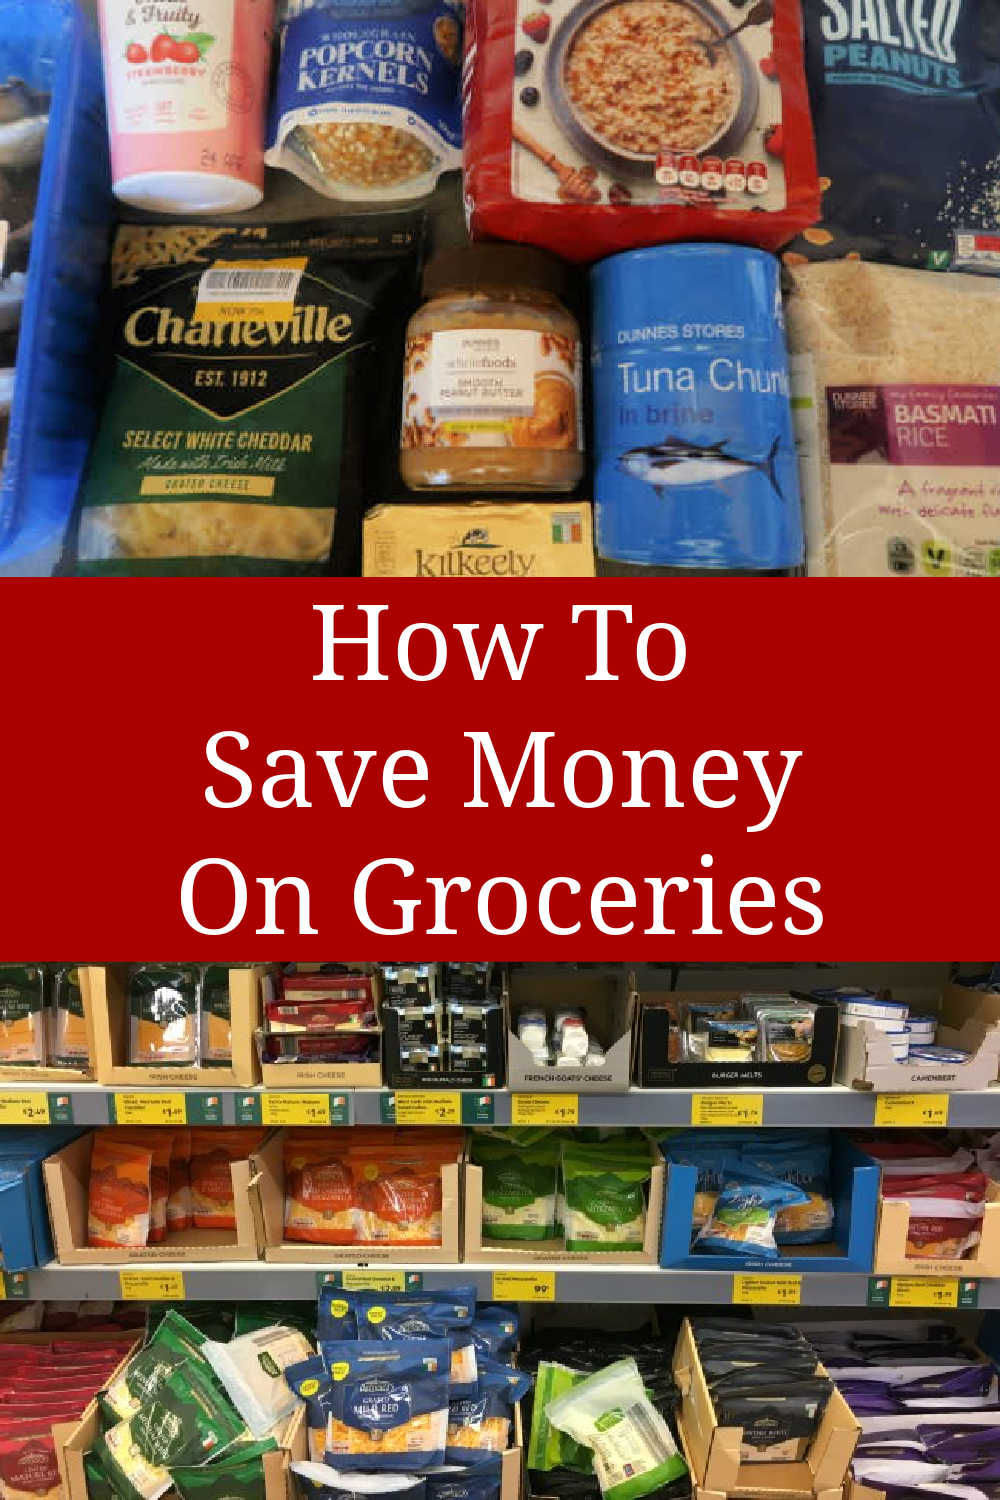 How To Save Money On Groceries - tips for the best ways to reduce your grocery bill on your food shopping - guide to help you shop on a budget with easy saving ideas